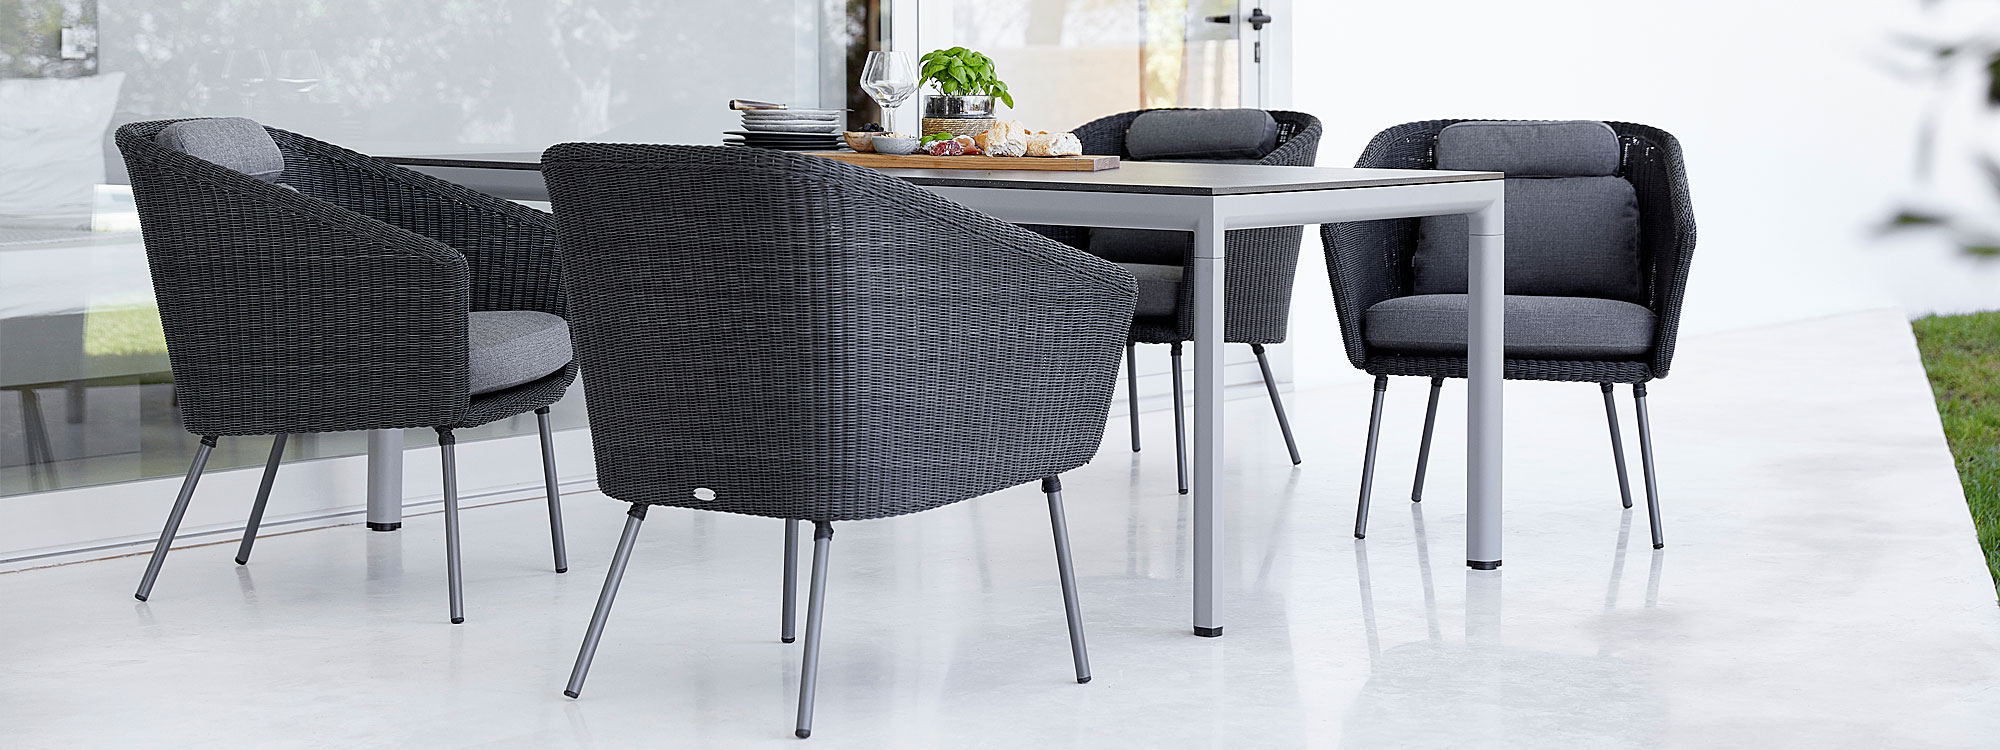 Image of Caneline Drop garden table and Mega dining chair in Graphite weave with Grey Air Touch cushions